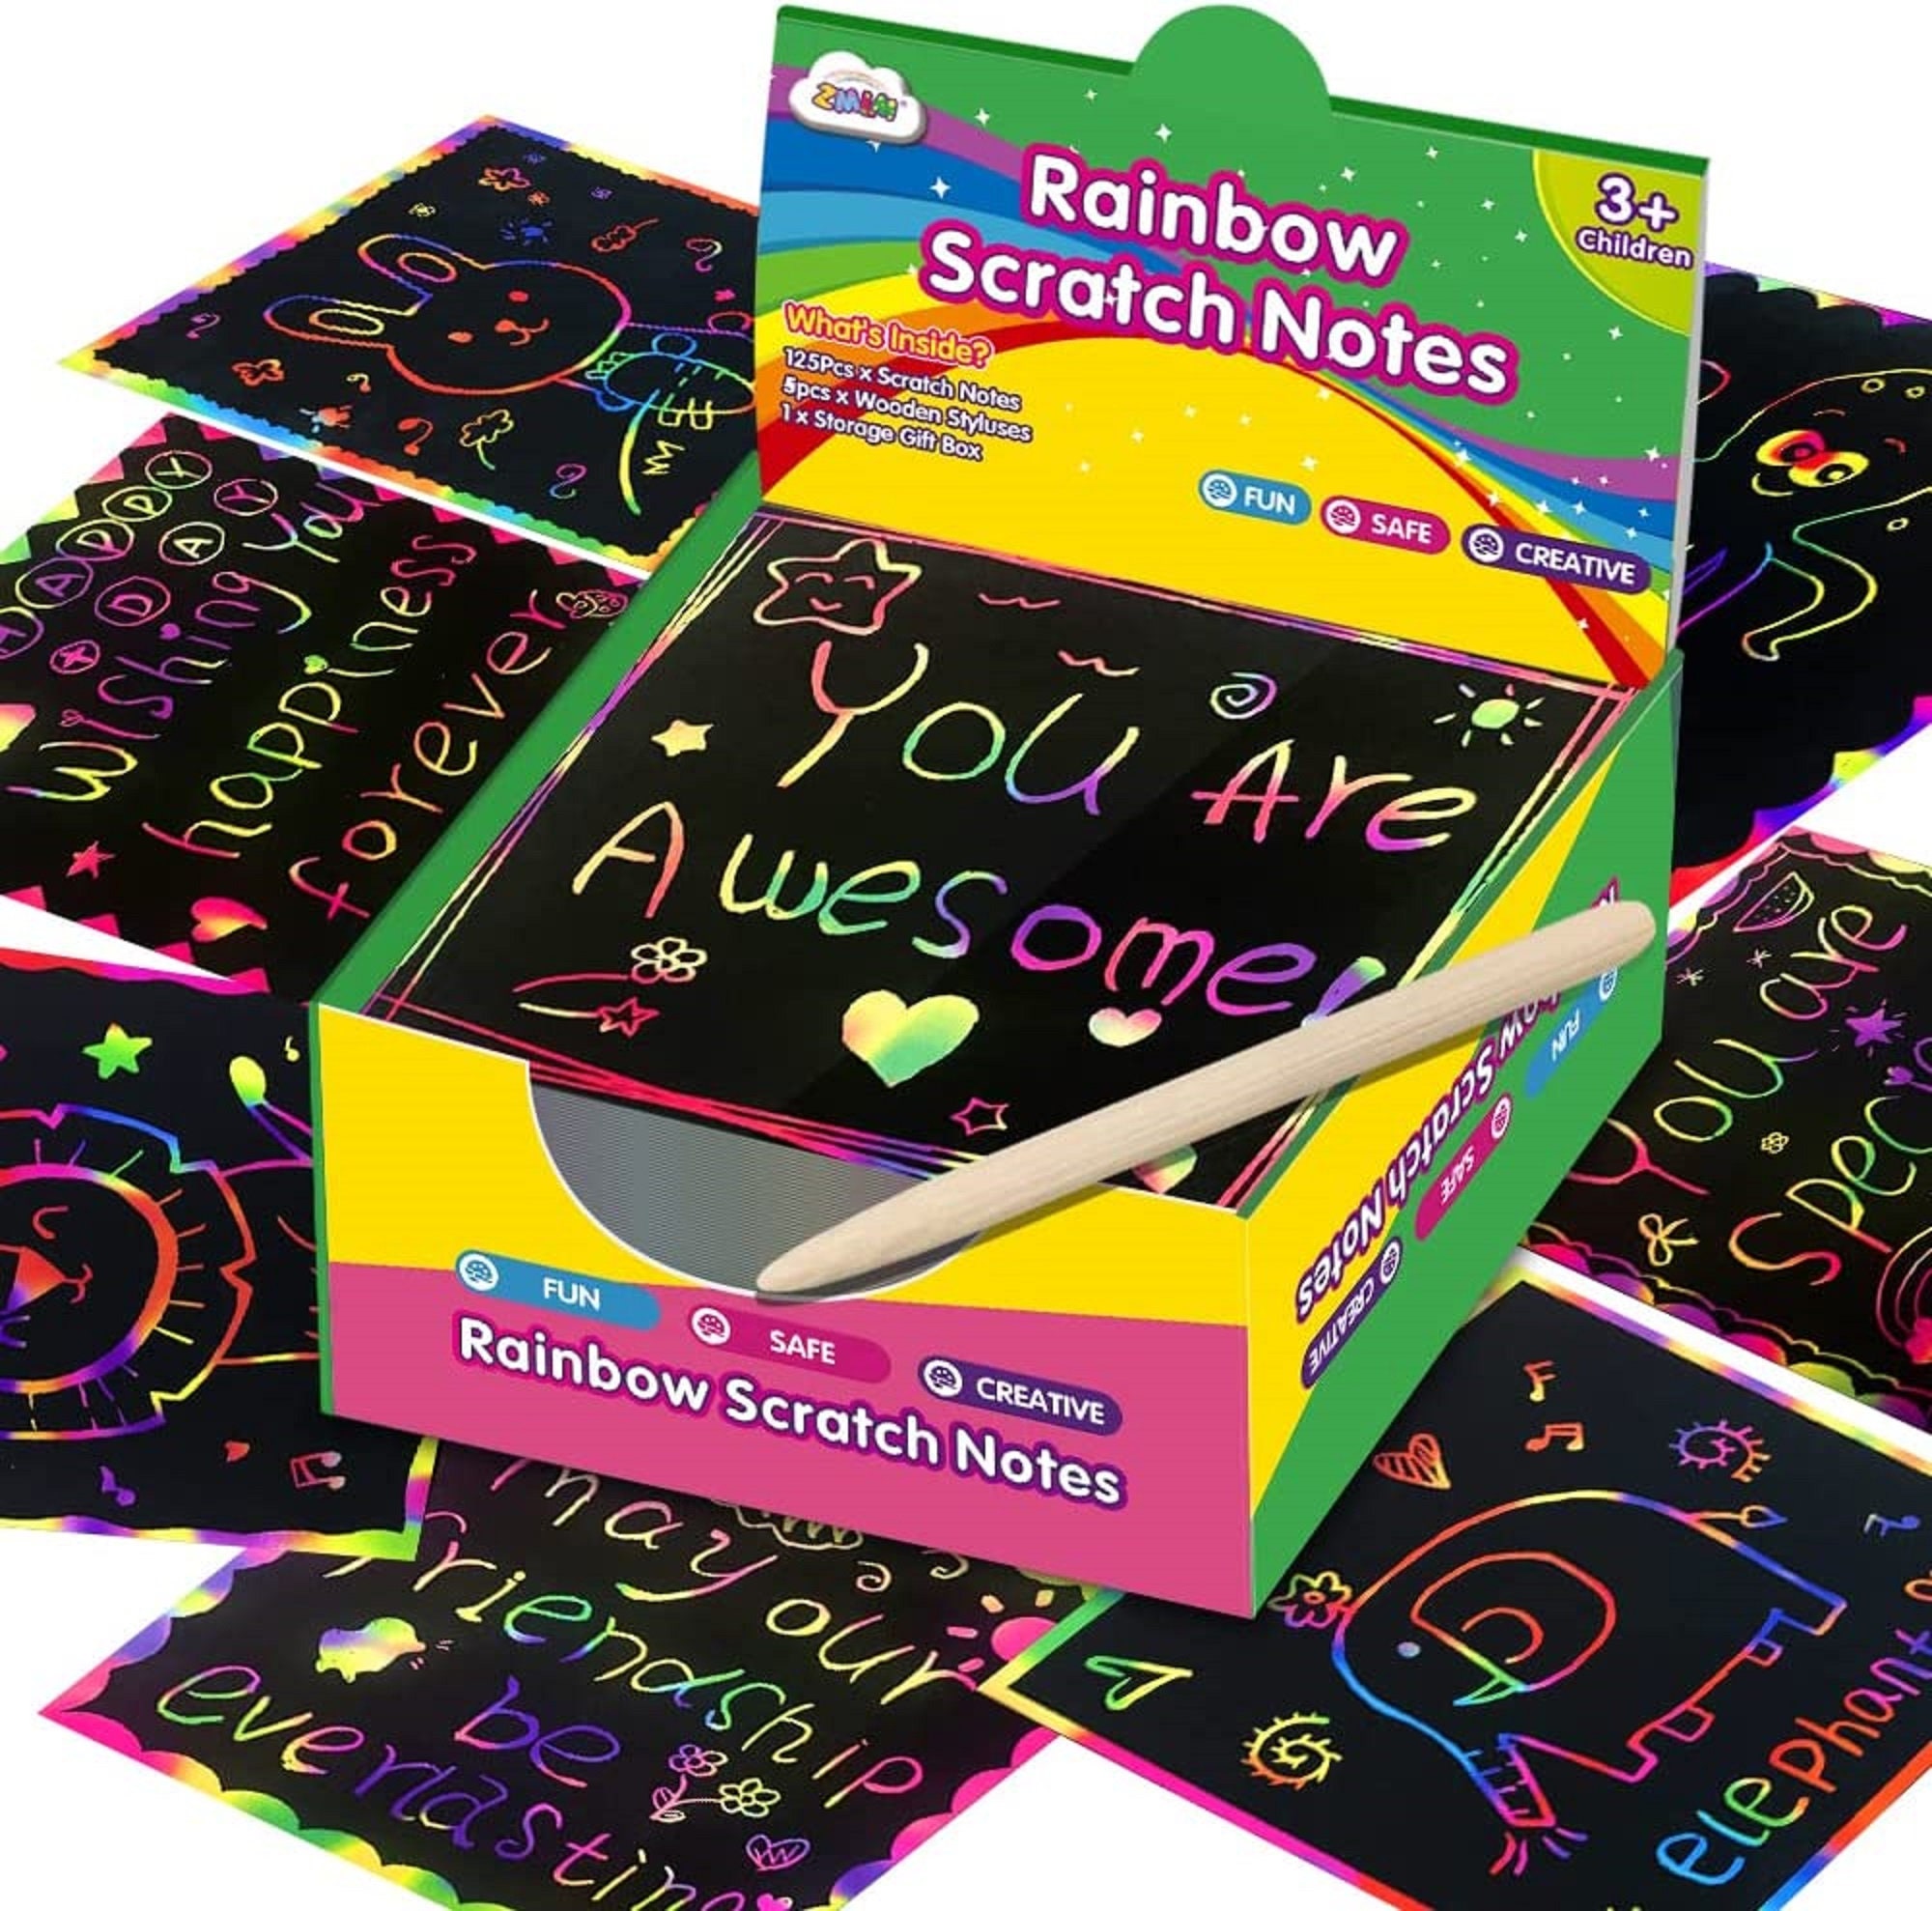  ZMLM Scratch Paper Art Set for Kids: Rainbow Magic Scratch Off  Art Craft Supplies Kit Birthday Party Toy 3 4 5 6 7 8 9 10 Year Old Boys  Girls Gift